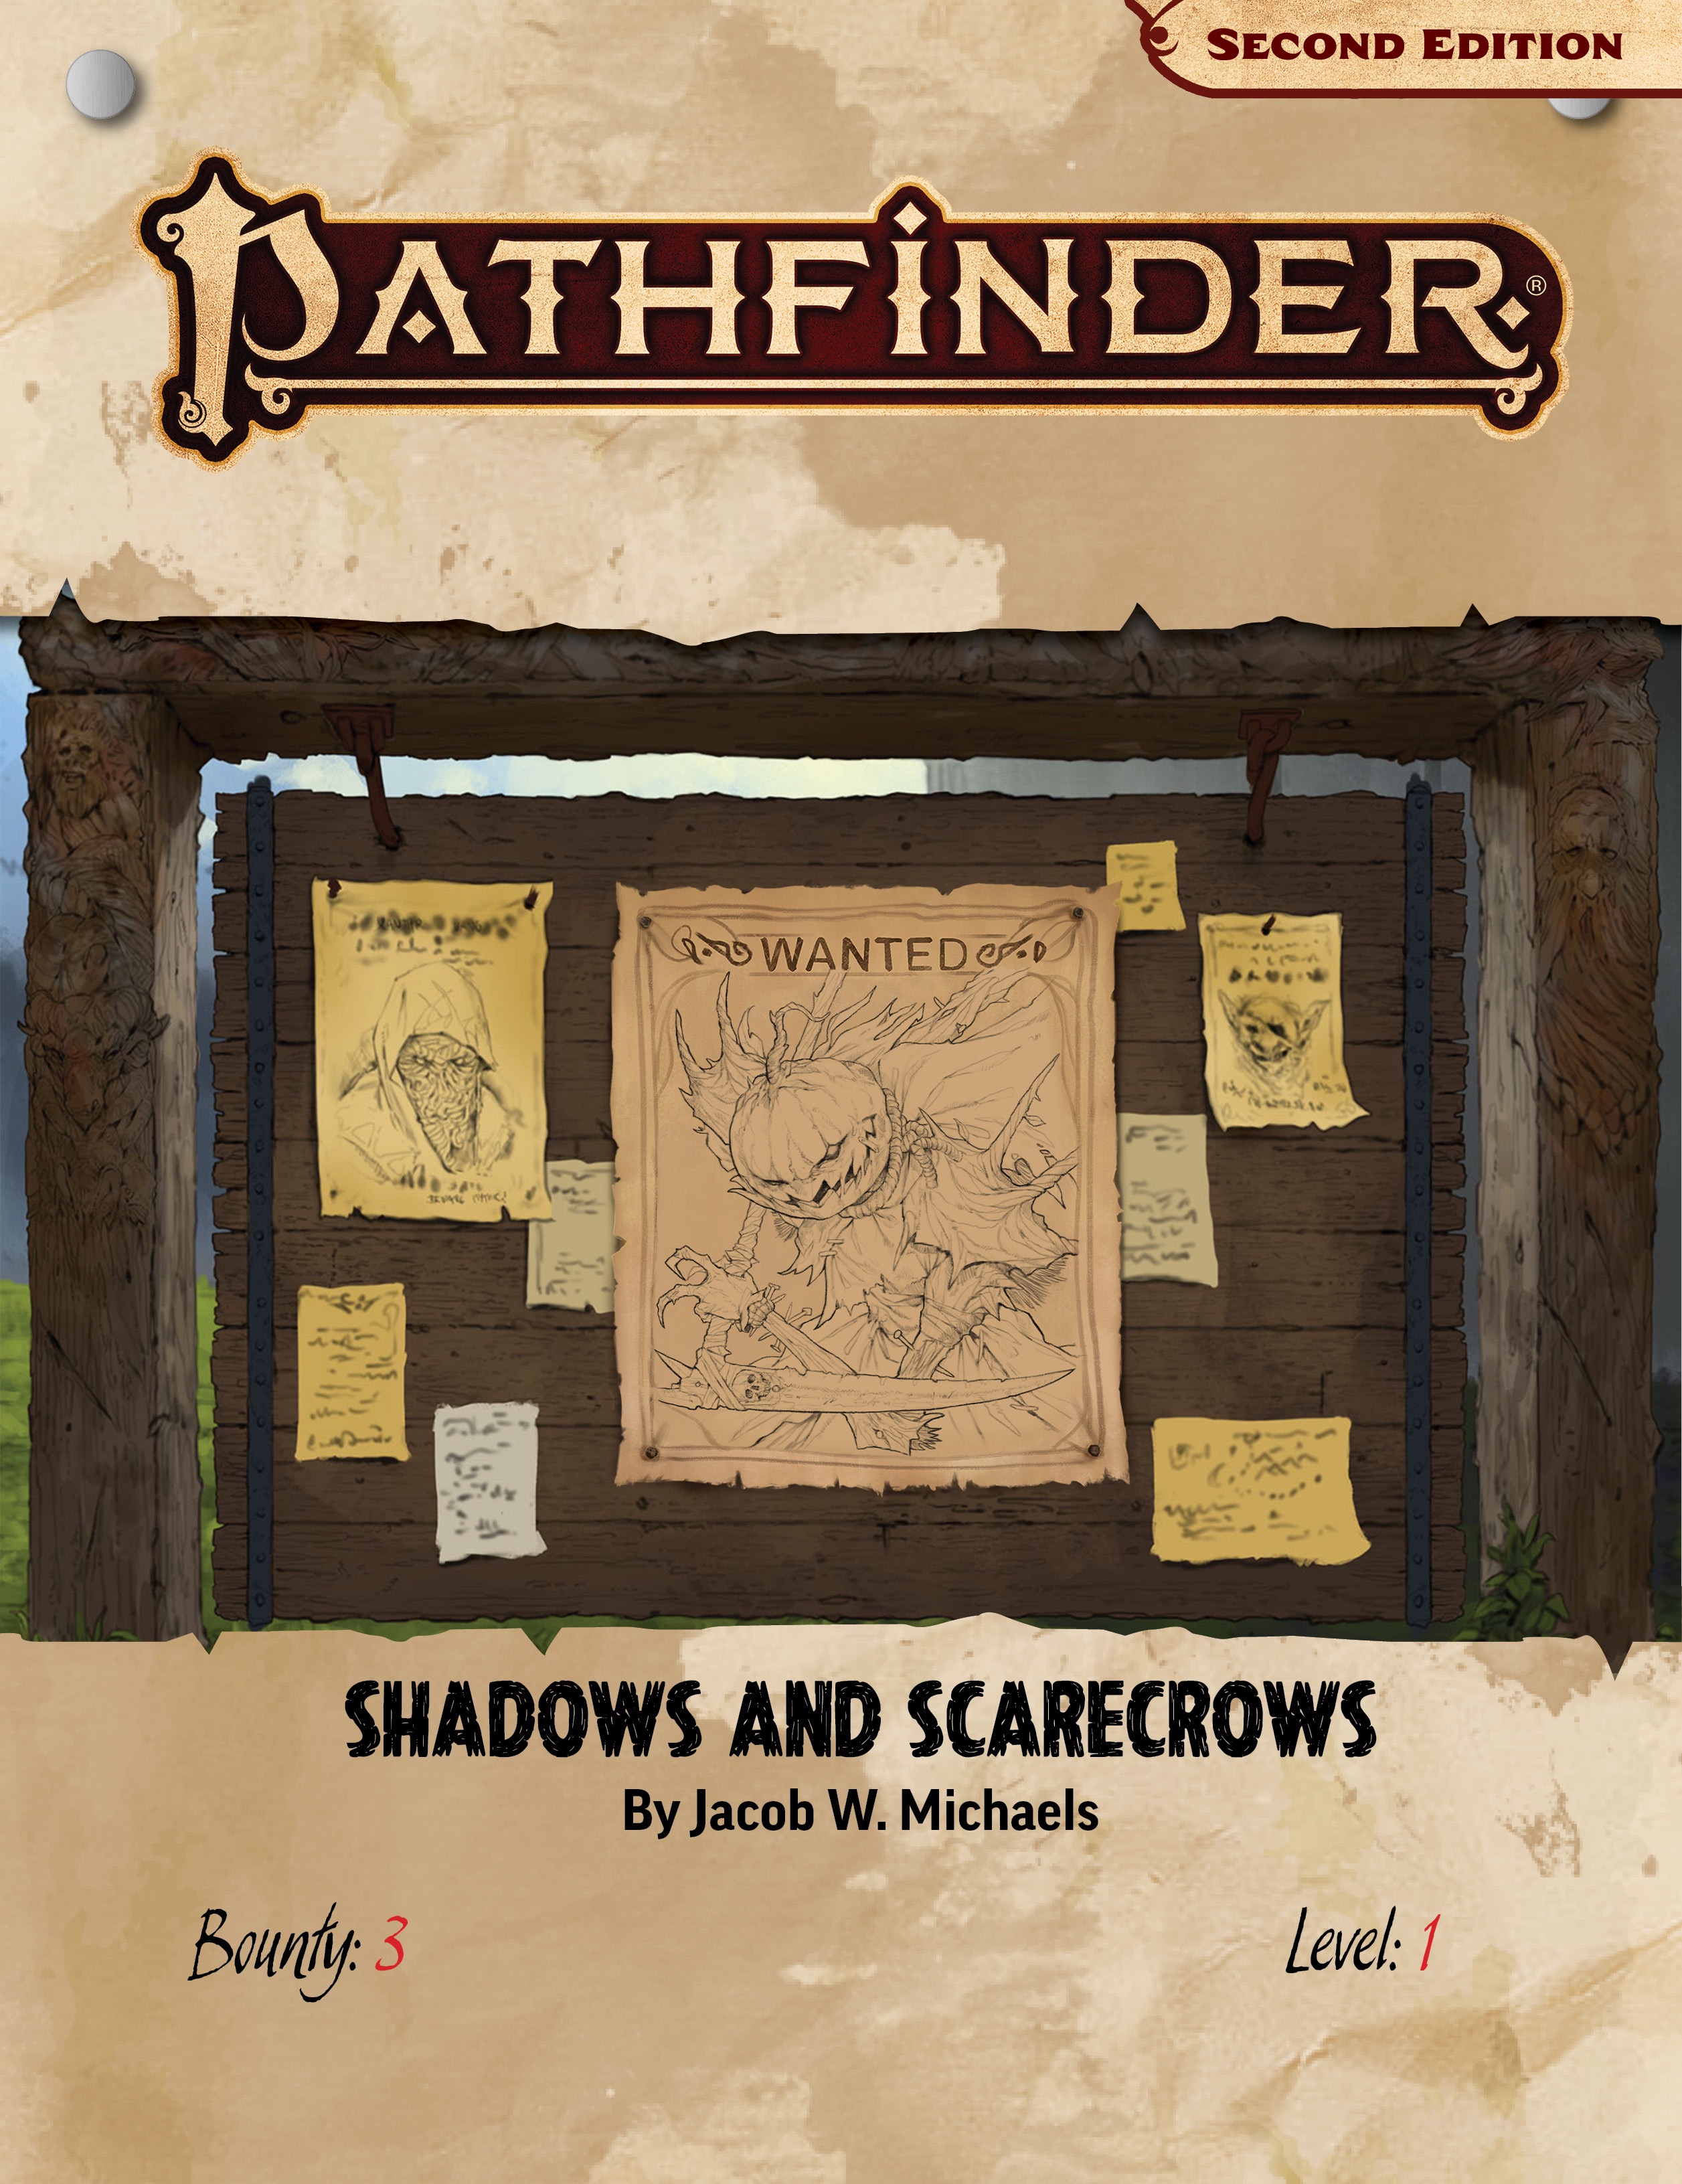 Pathfinder Society Shadows and Scarecrows cover. A town board with a wanted poster for a dark scarecrow